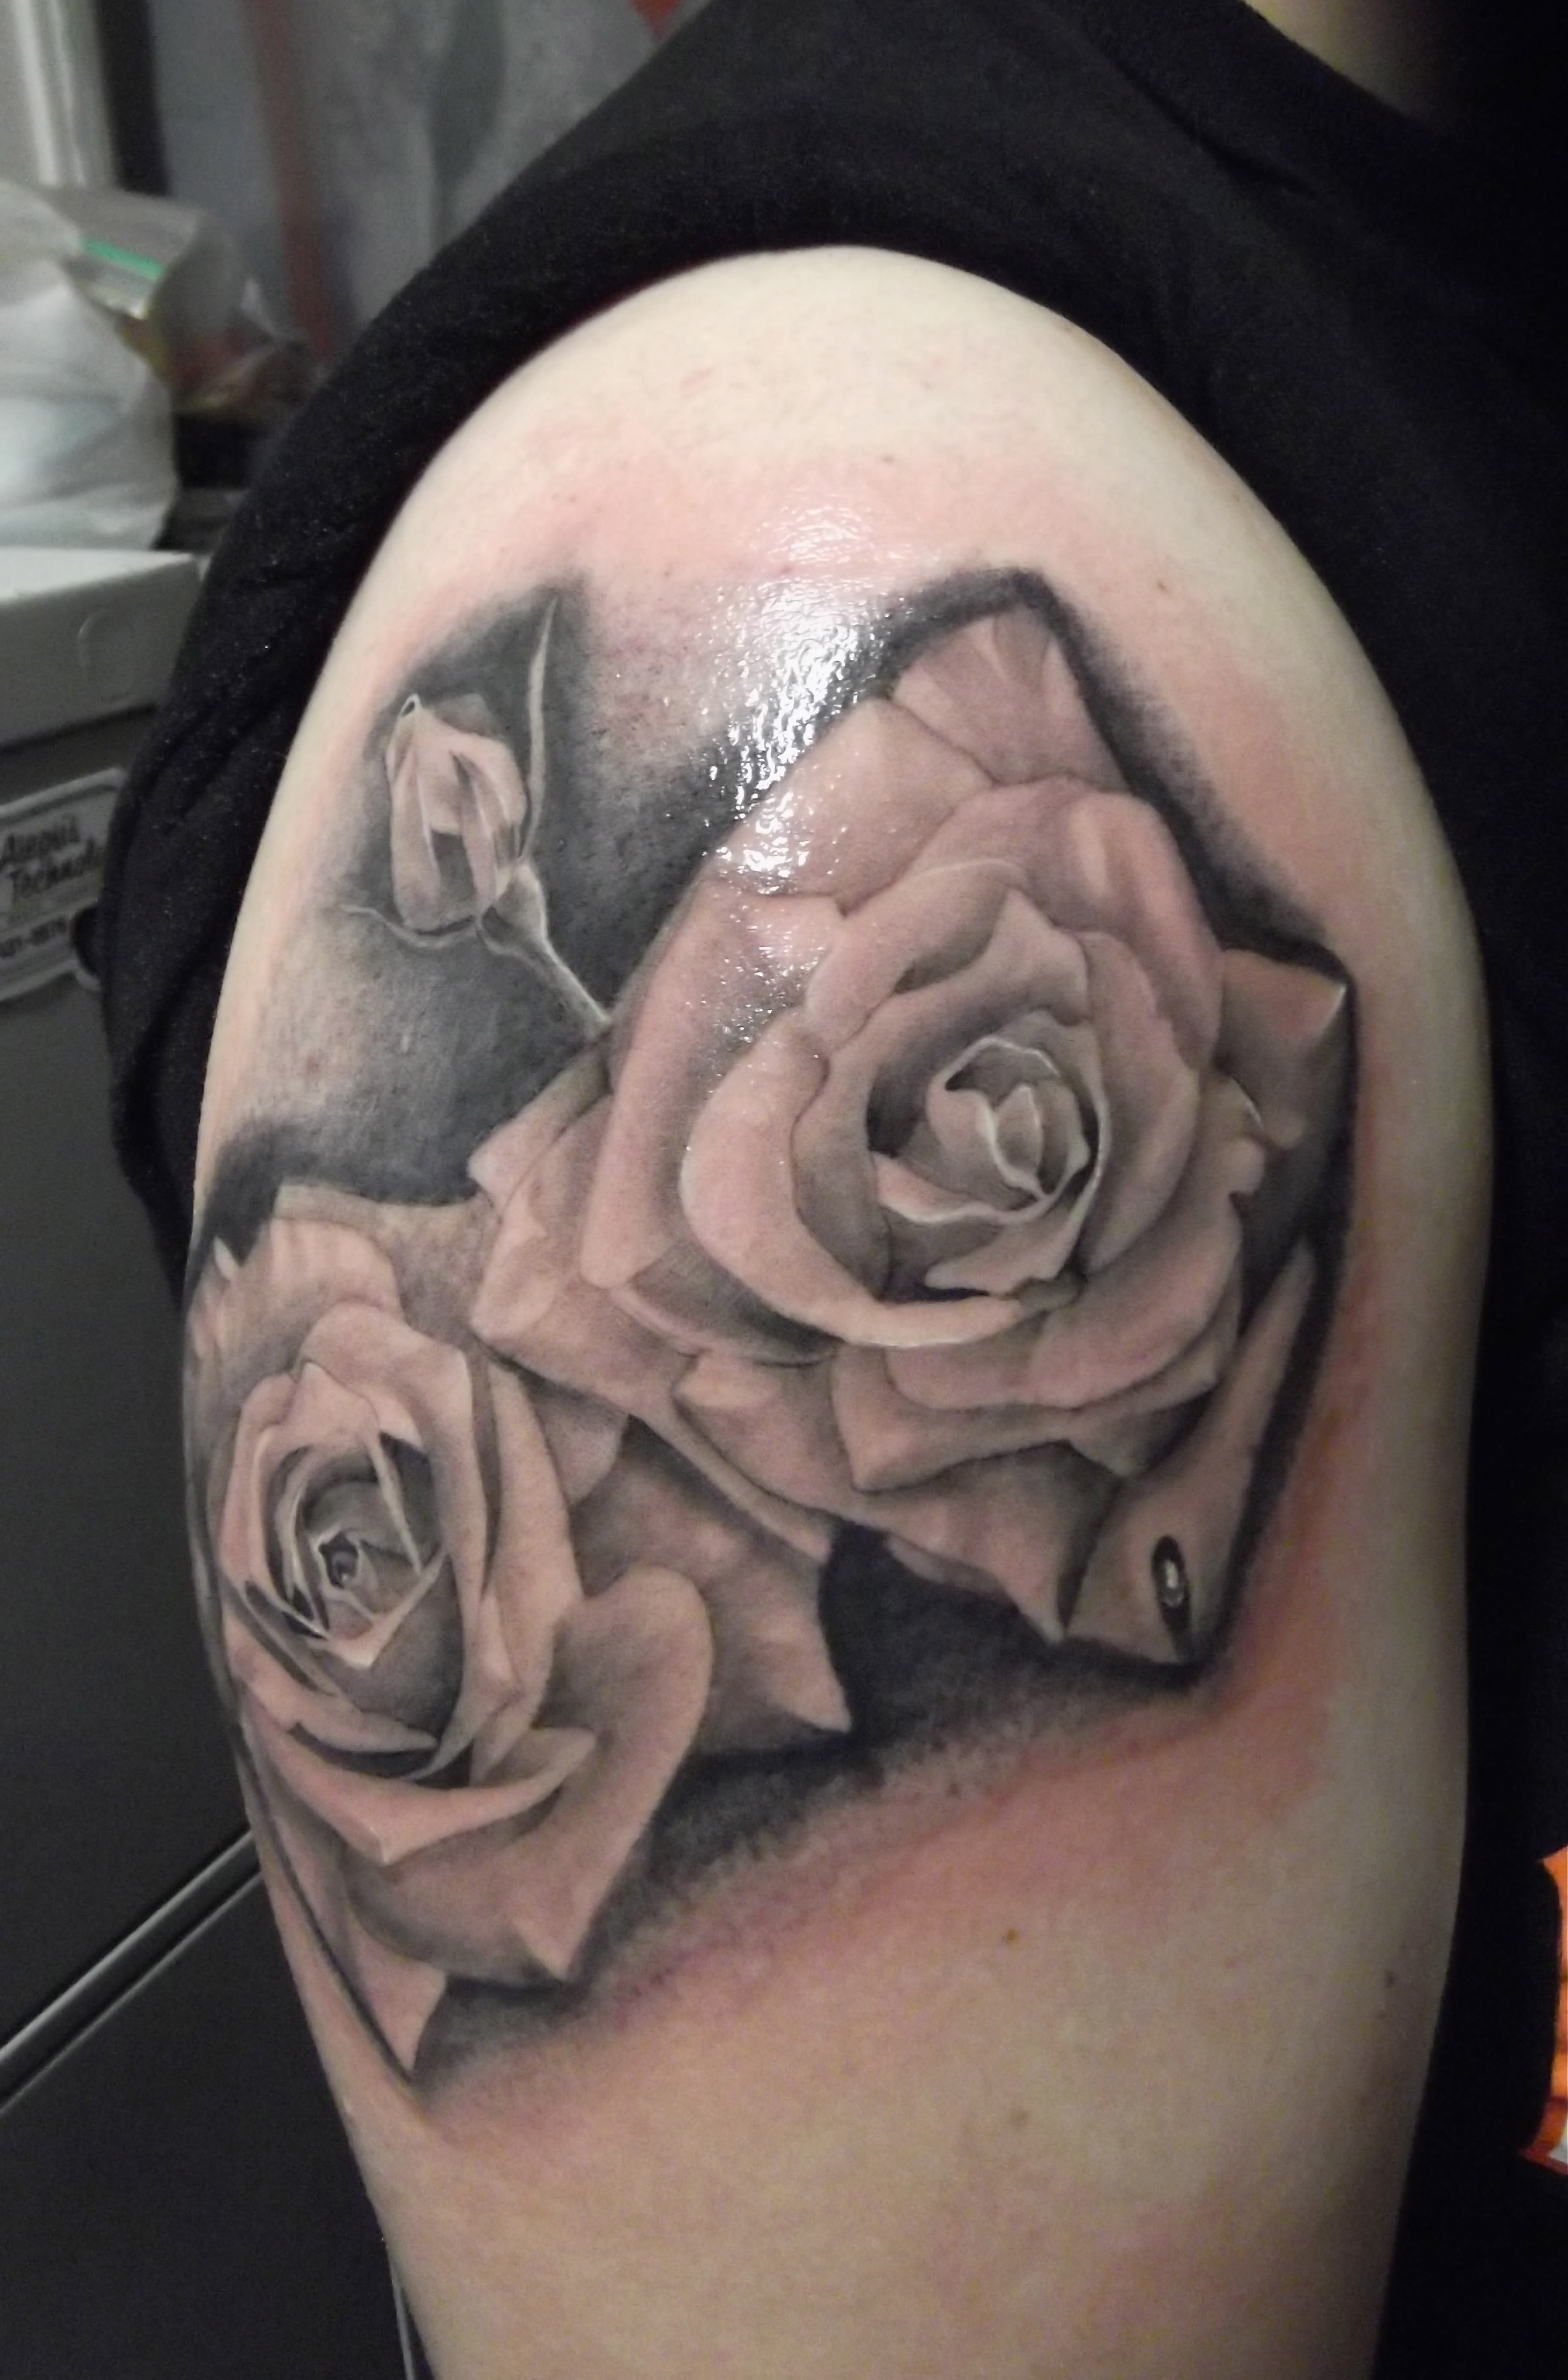 Black And Red Rose Tattoo